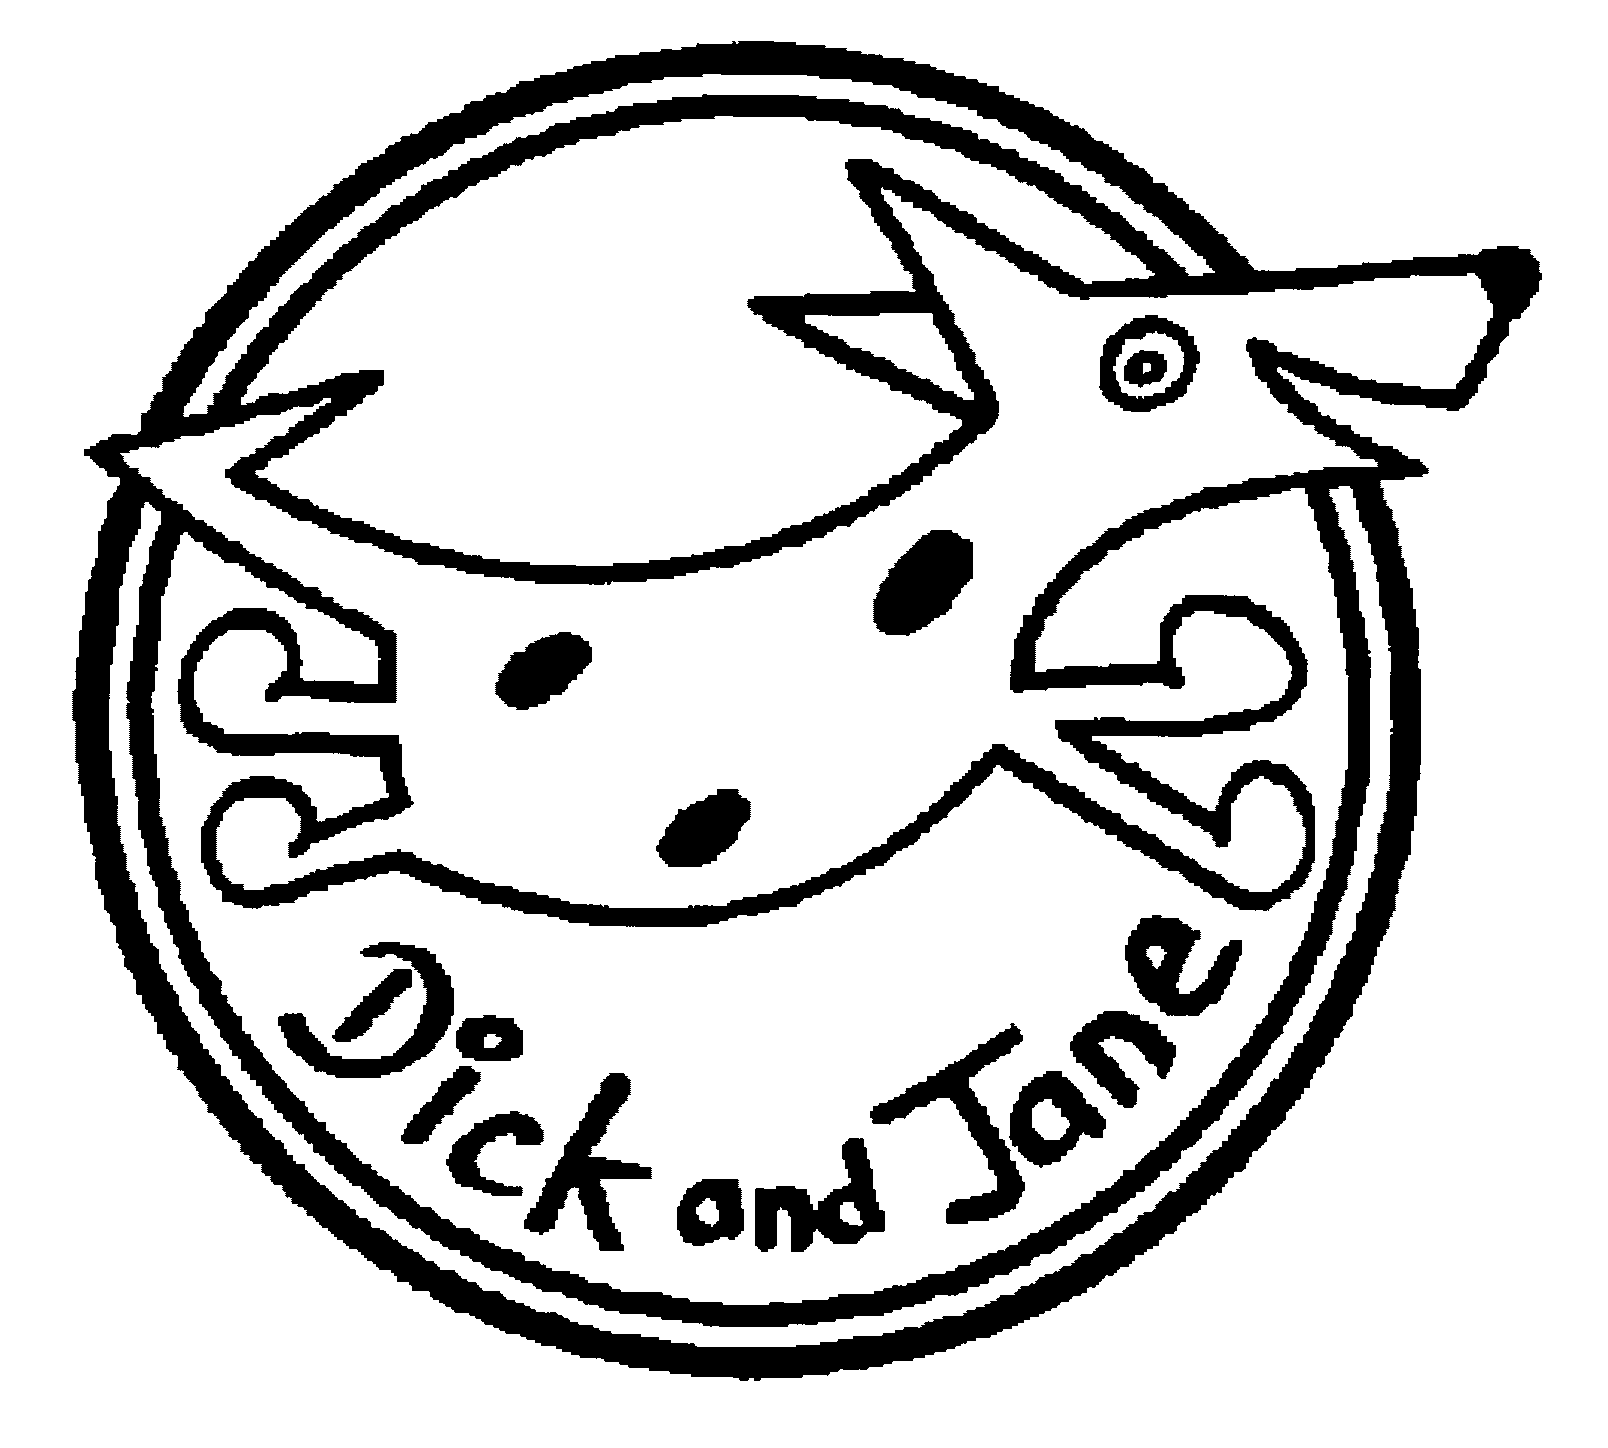 DICK AND JANE